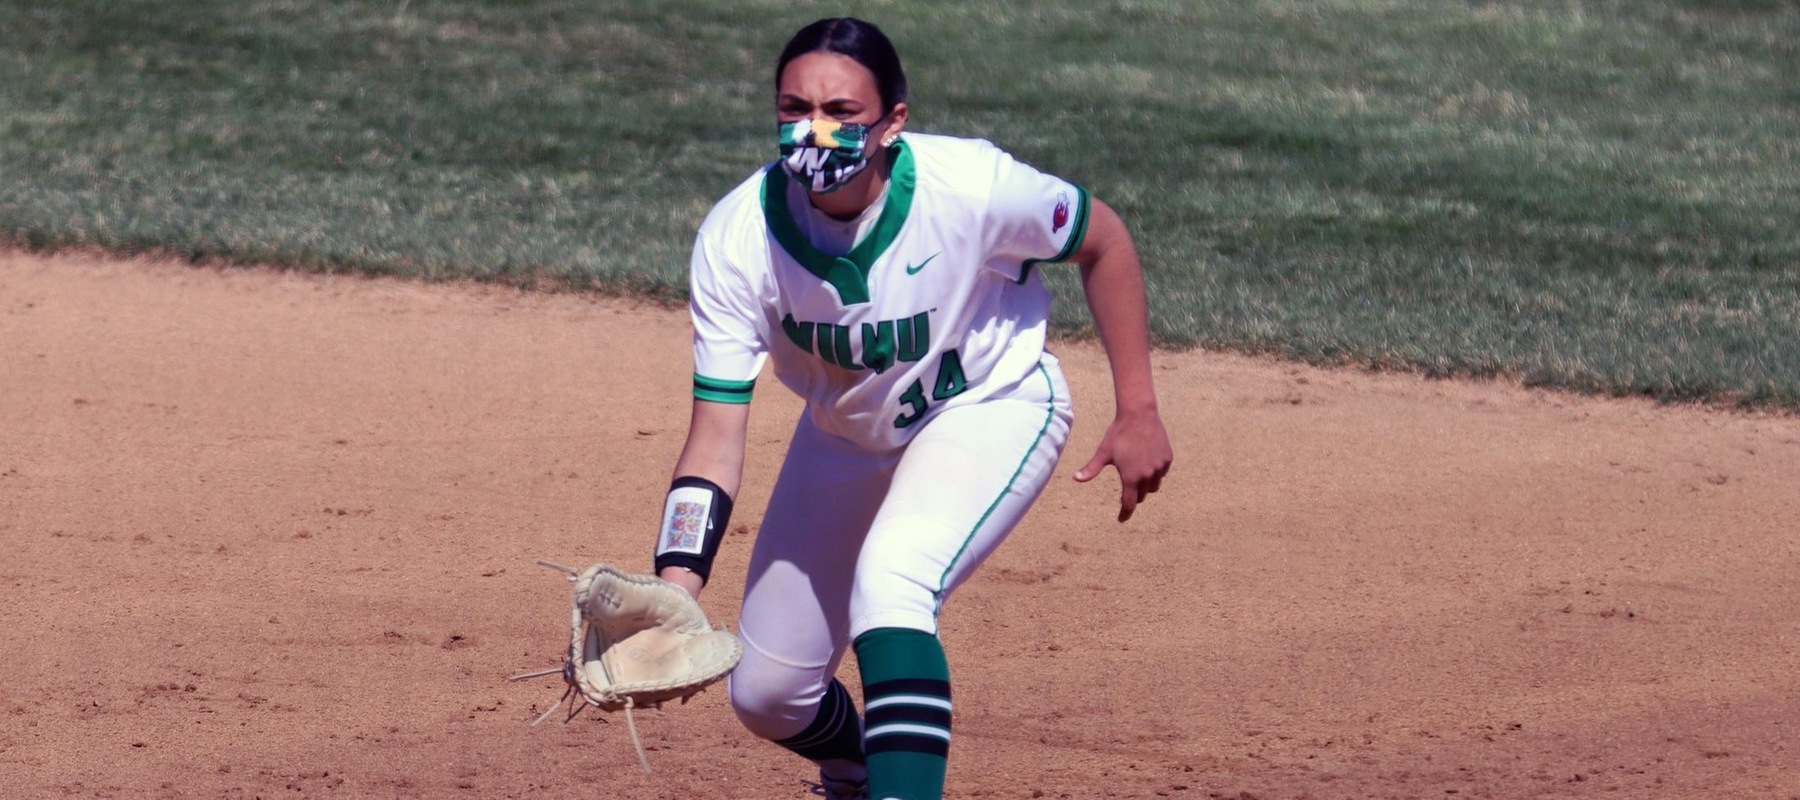 File photo of Arianna Millan who batted 3-for-3 with 4 RBI in game one against Goldey-Beacom. Copyright 2021; Wilmington University. All rights reserved. Photo by Dan Lauletta. March 30, 2021 vs. Caldwell.